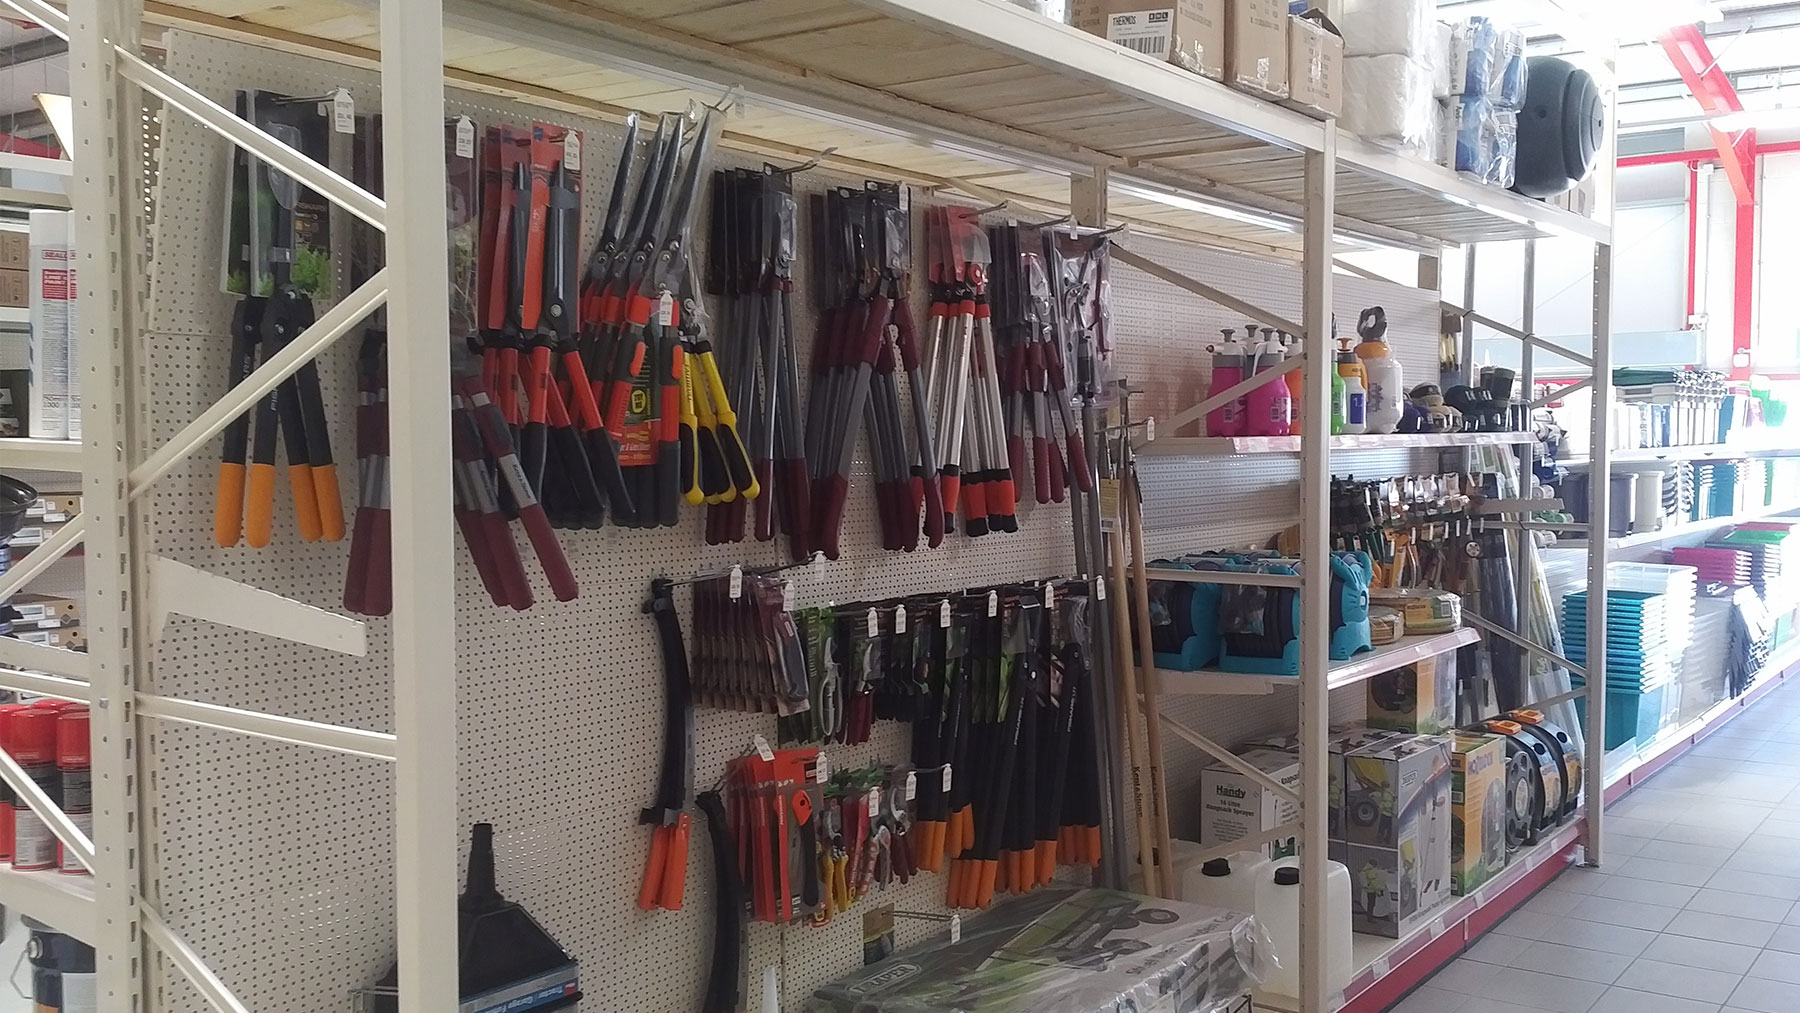 wall shelving for tools and DIY